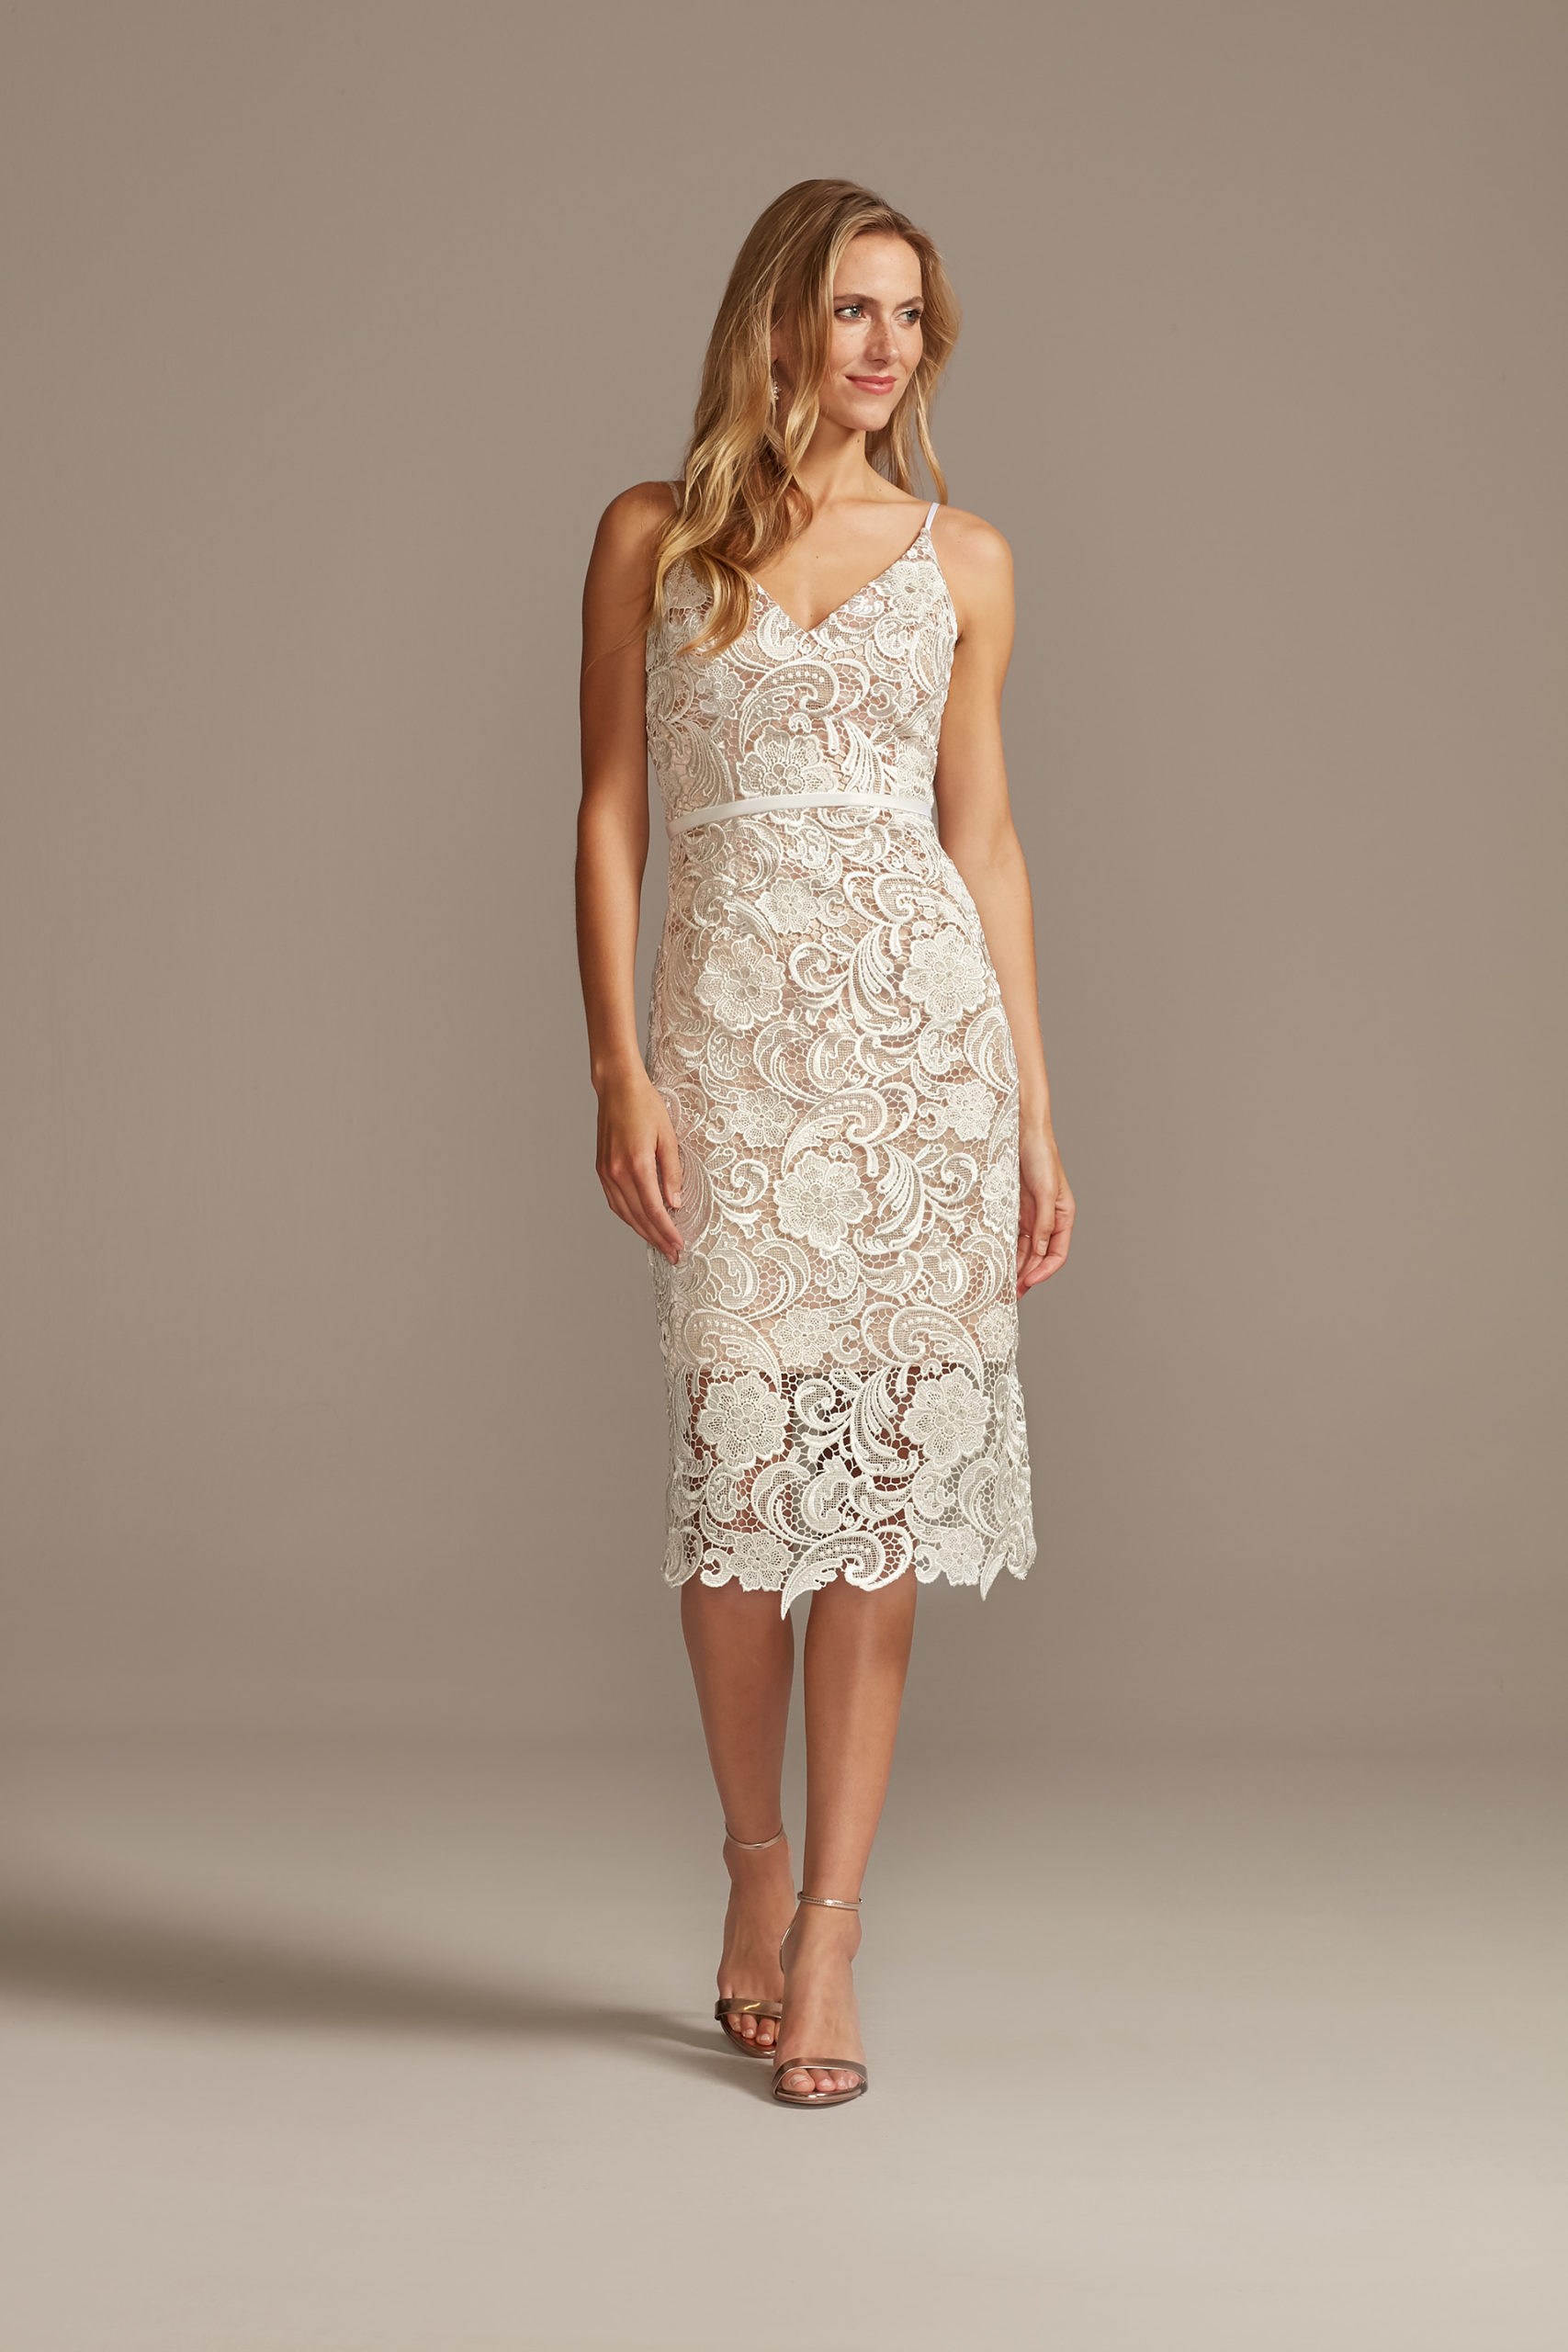 lace couthouse wedding dress